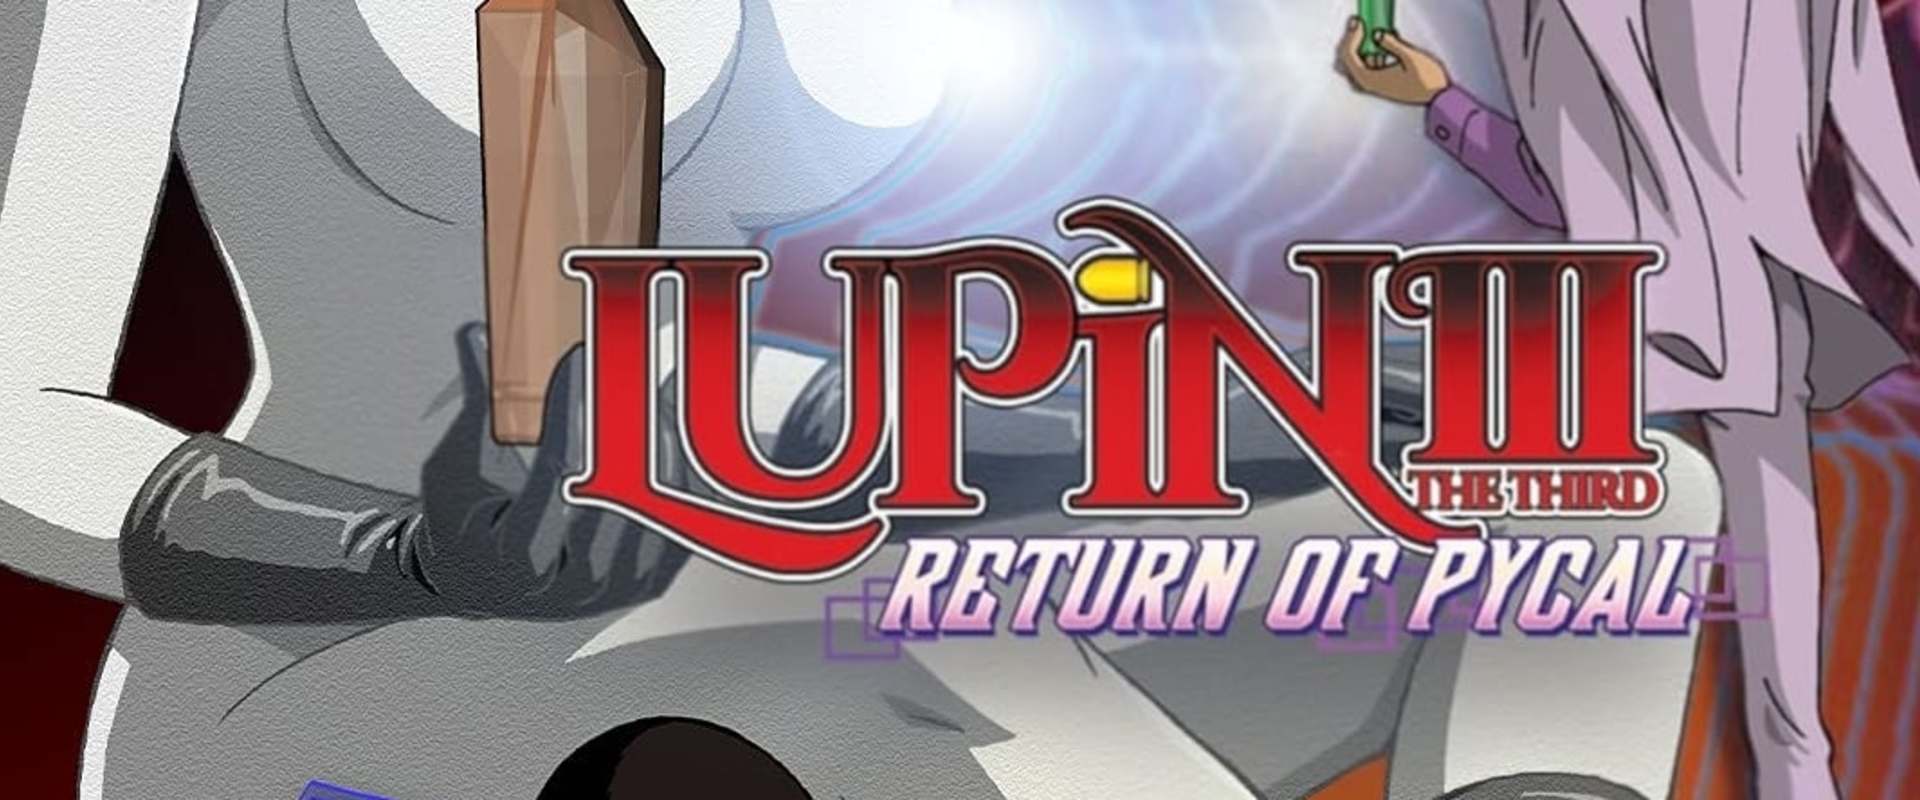 Lupin the Third: Return of Pycal background 2